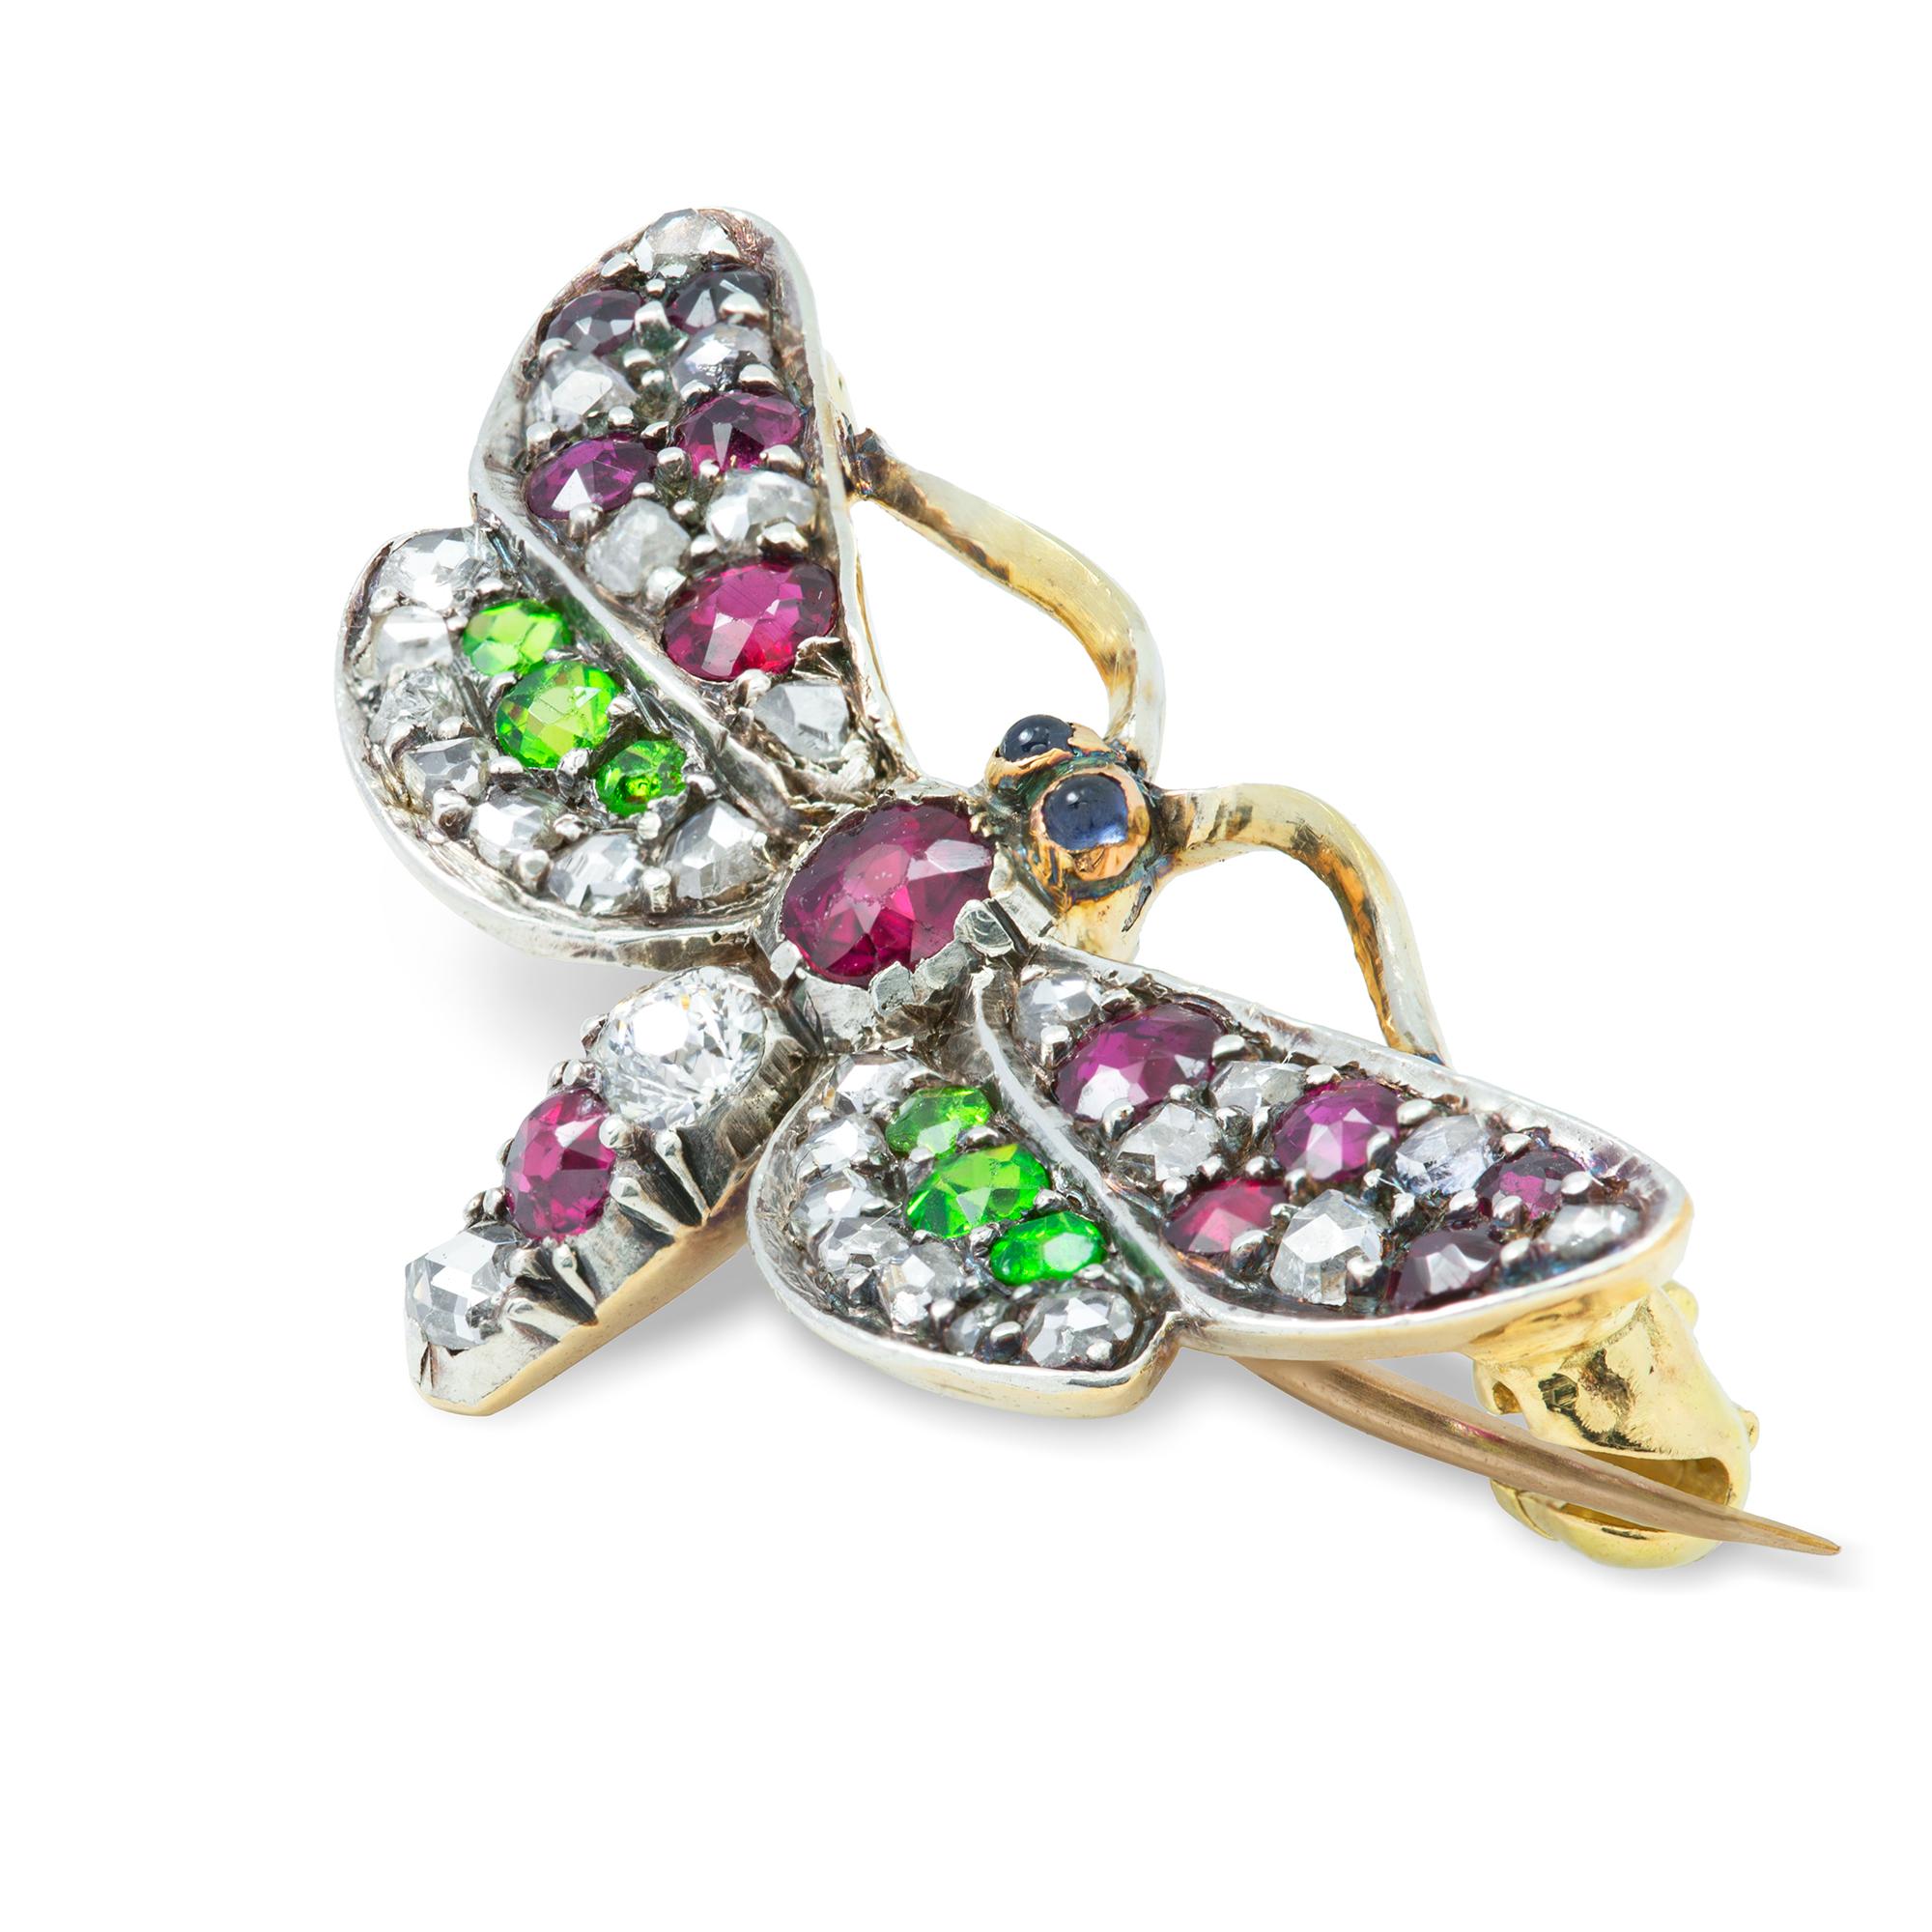 A late Victorian multi-gem butterfly brooch, the wings and body encrusted with old-cut and rose-cut diamonds, highlighted with demantoid garnets, and rubies, with cabochon-cut sapphire eyes, set in silver to a yellow gold mount and brooch fitting,